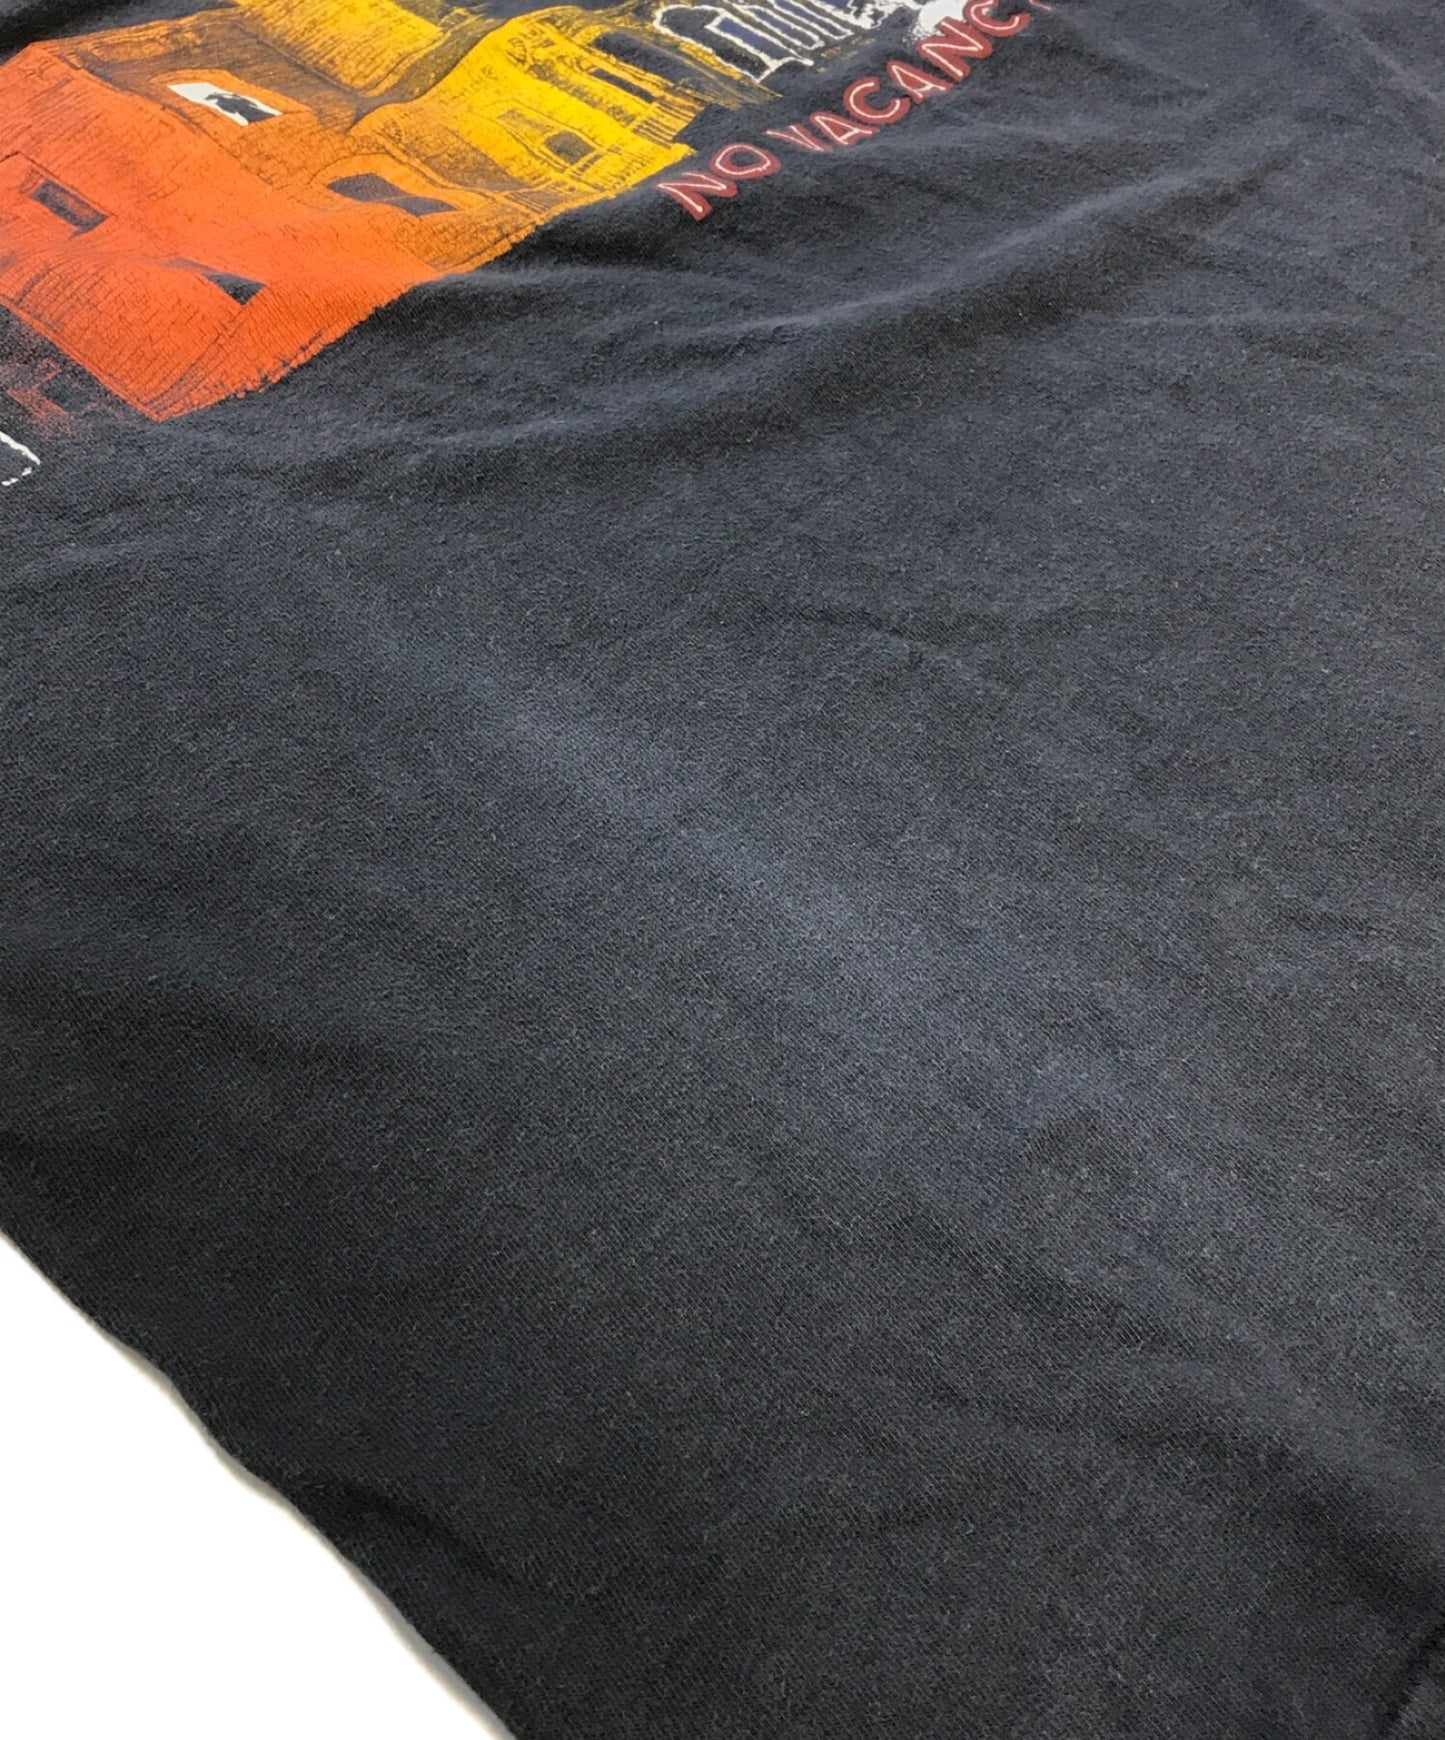 [Pre-owned] PSYCHO Cinema T-Shirt